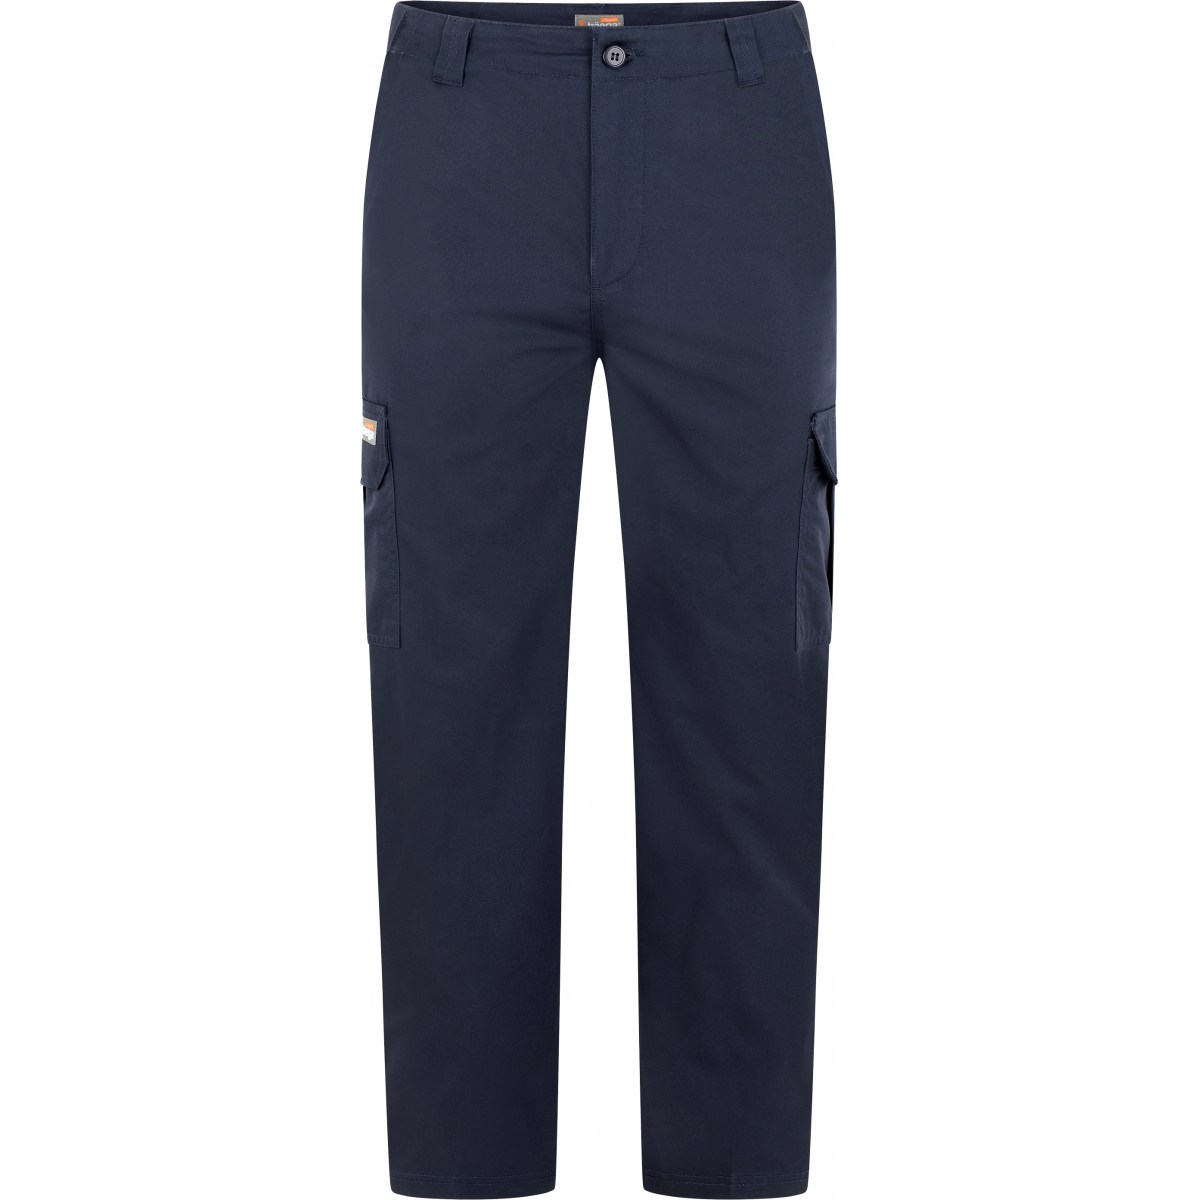 TRC45 CARGO TROUSER - AAA Safety Supplies Limited